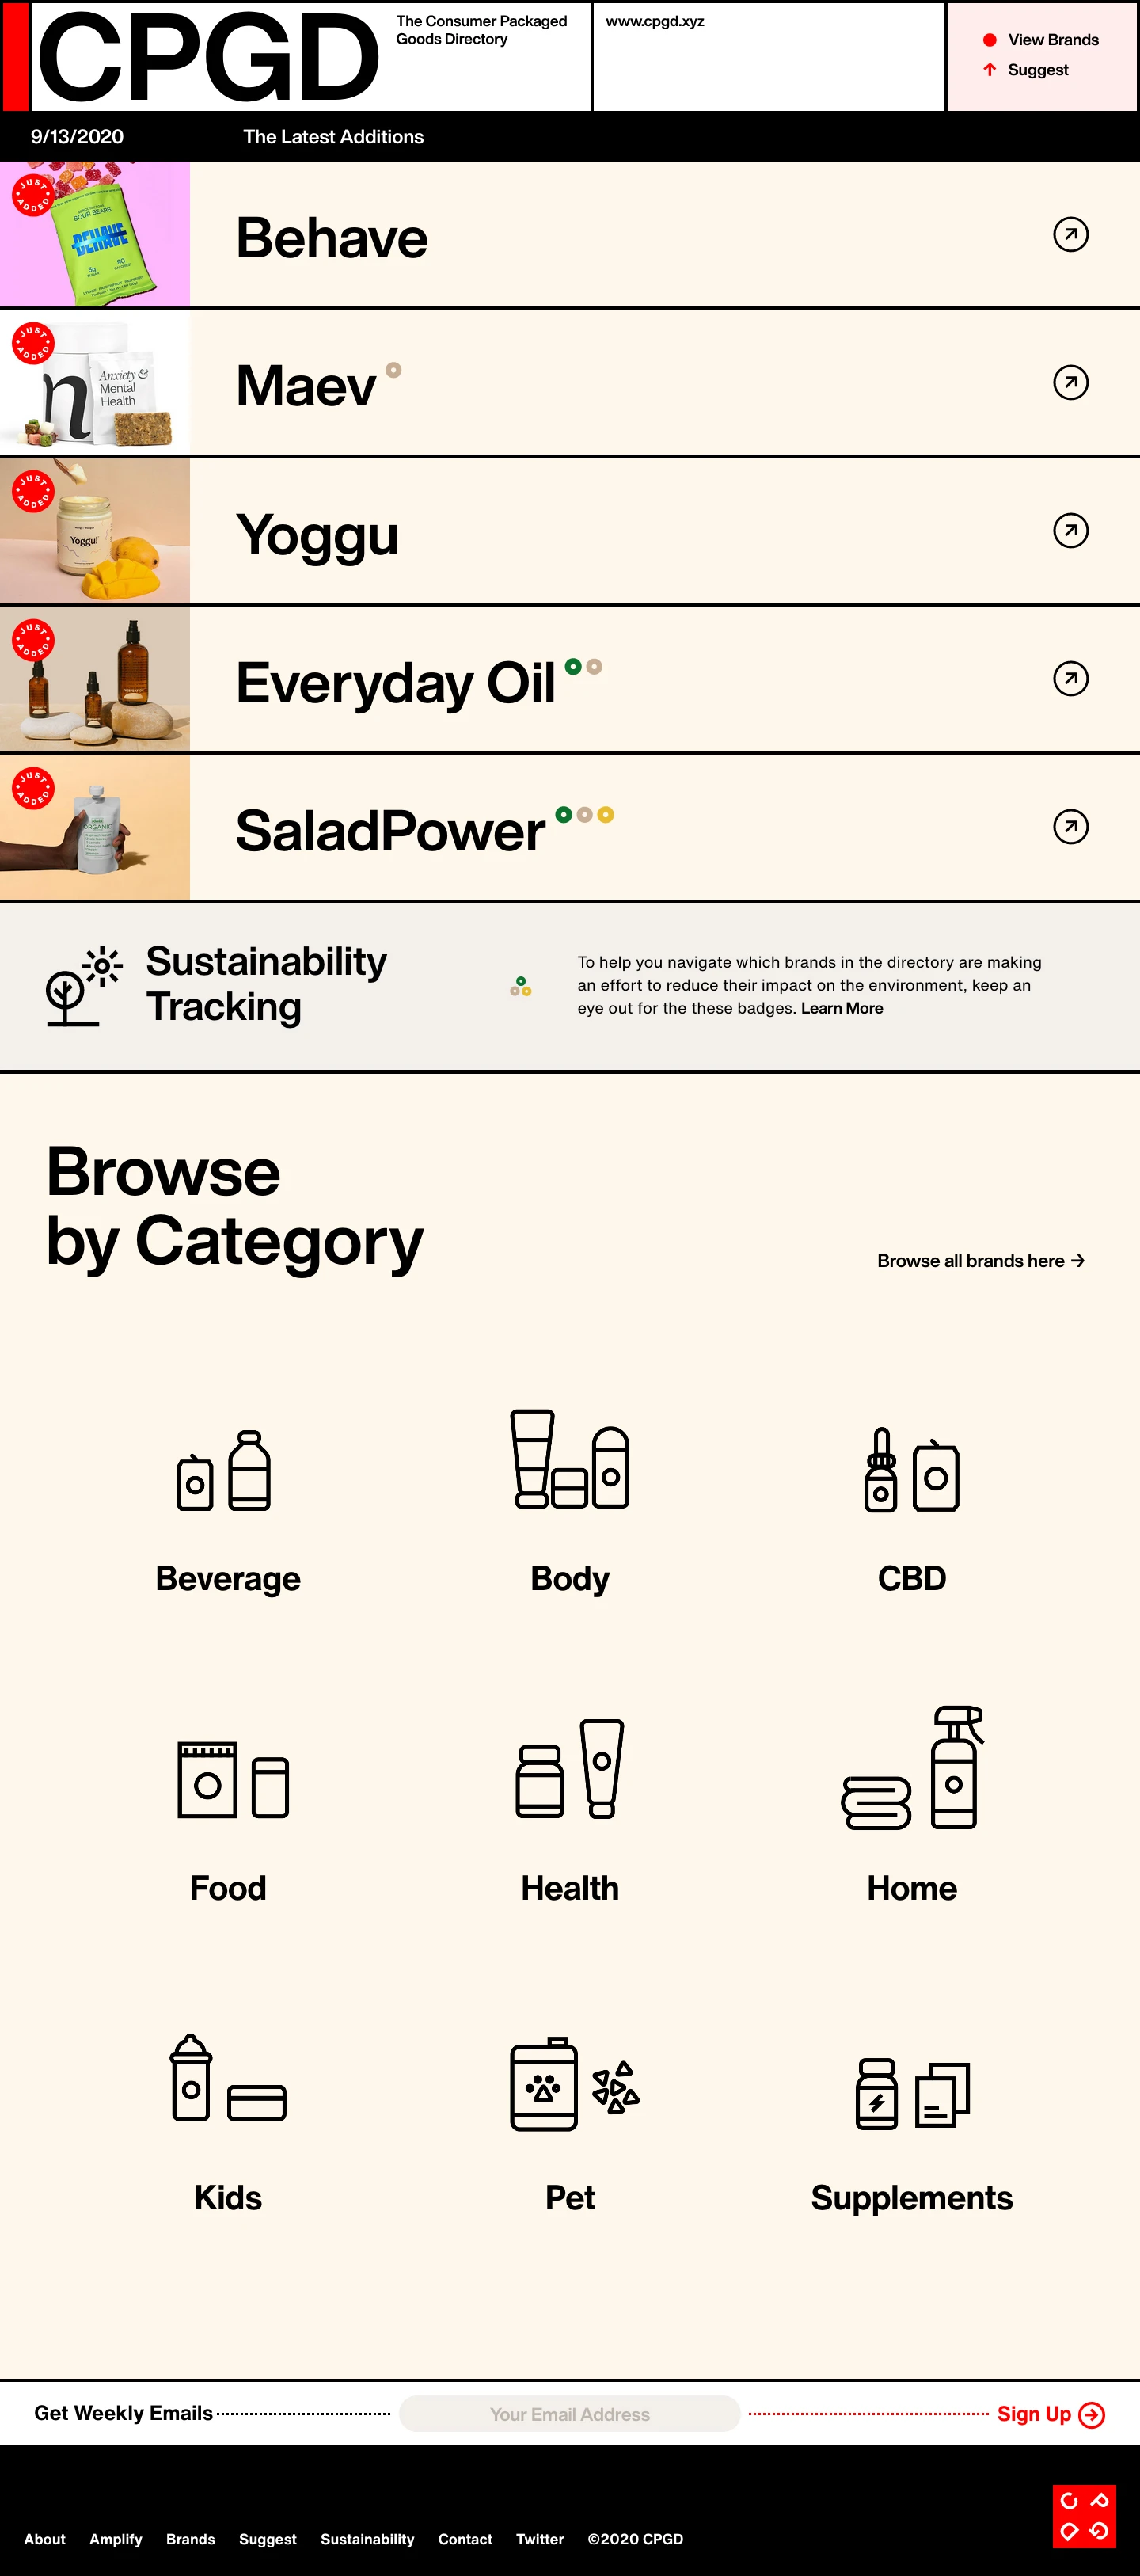 CPGD Landing Page Example: The Consumer Packaged Goods Directory